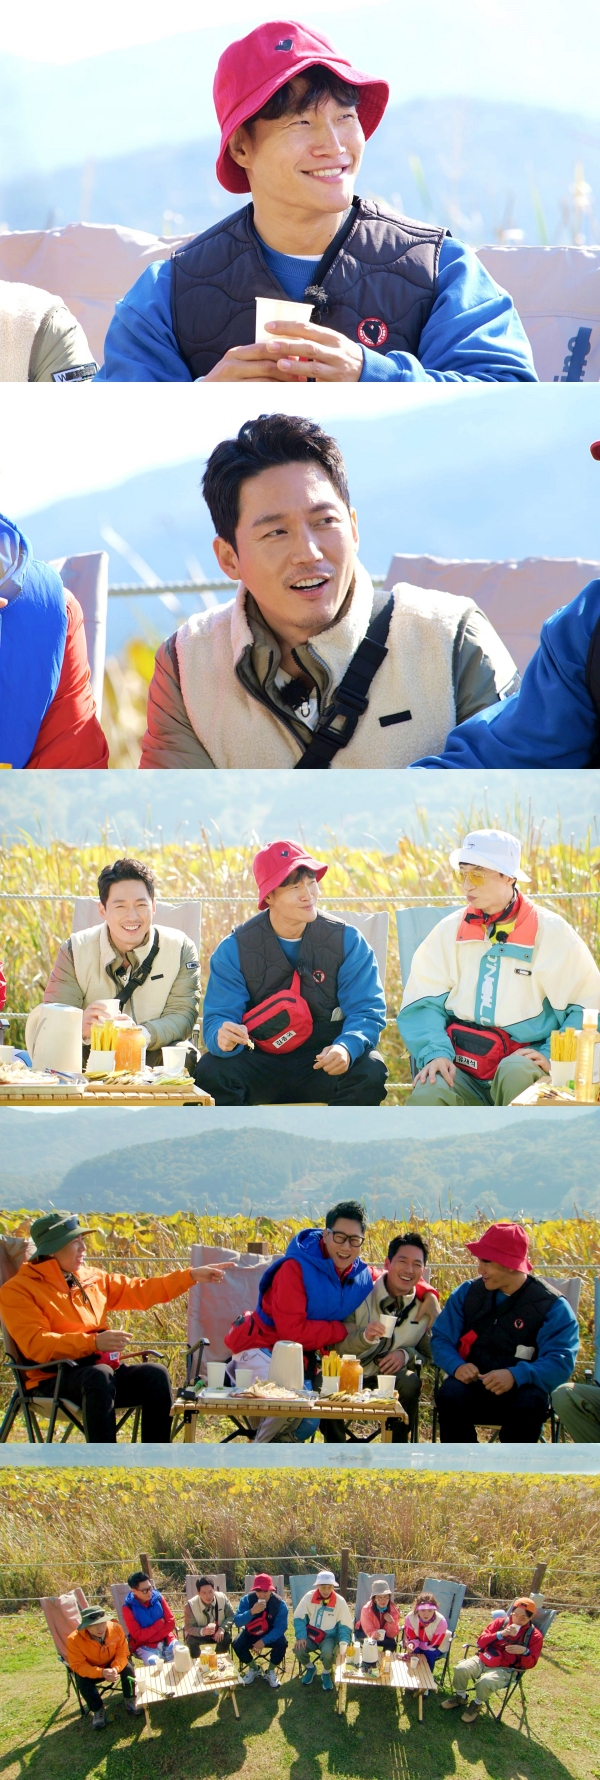 On the afternoon of the 7th, SBS entertainment program Running Man will be held by members.The crew, who conducted the We Gon Be Alright Day race, which was decorated with talk only, summoned the Memories We Gon Be Alright mission in a recent recording and showed an upgrade rule that combines Manito games.Here, Actor Jang Hyuk, who is known as Tumuch Talker, added as a guest. (Jang Hyuk) I raised it with my heart, said Jeon So-min, who revealed his fanfare for Jang Hyuk as a child.He poured out slanderous talk without hesitation and received the restraint of the production team.Talk tanker Yoo Jae-Suk was excited about the talk that came back, and he was embarrassed by the sudden action of changing his pants.Kim Jong-kook revealed an anecdote with singer Chae Yeon 15 years ago.Kim Jong-kook first revealed his feelings when he was reunited with high school student Chae Yeon and entertainer Chae Yeon, who he met as a fan at the time.In addition, Kim Jong-kooks love lines from the turbo activities to the X-Men were revealed, and Kim Jong-kooks 20-year-old Teachy Jang Hyuks meaningful testimony added to Kim Jong-kooks love line.It aired at 5 p.m.